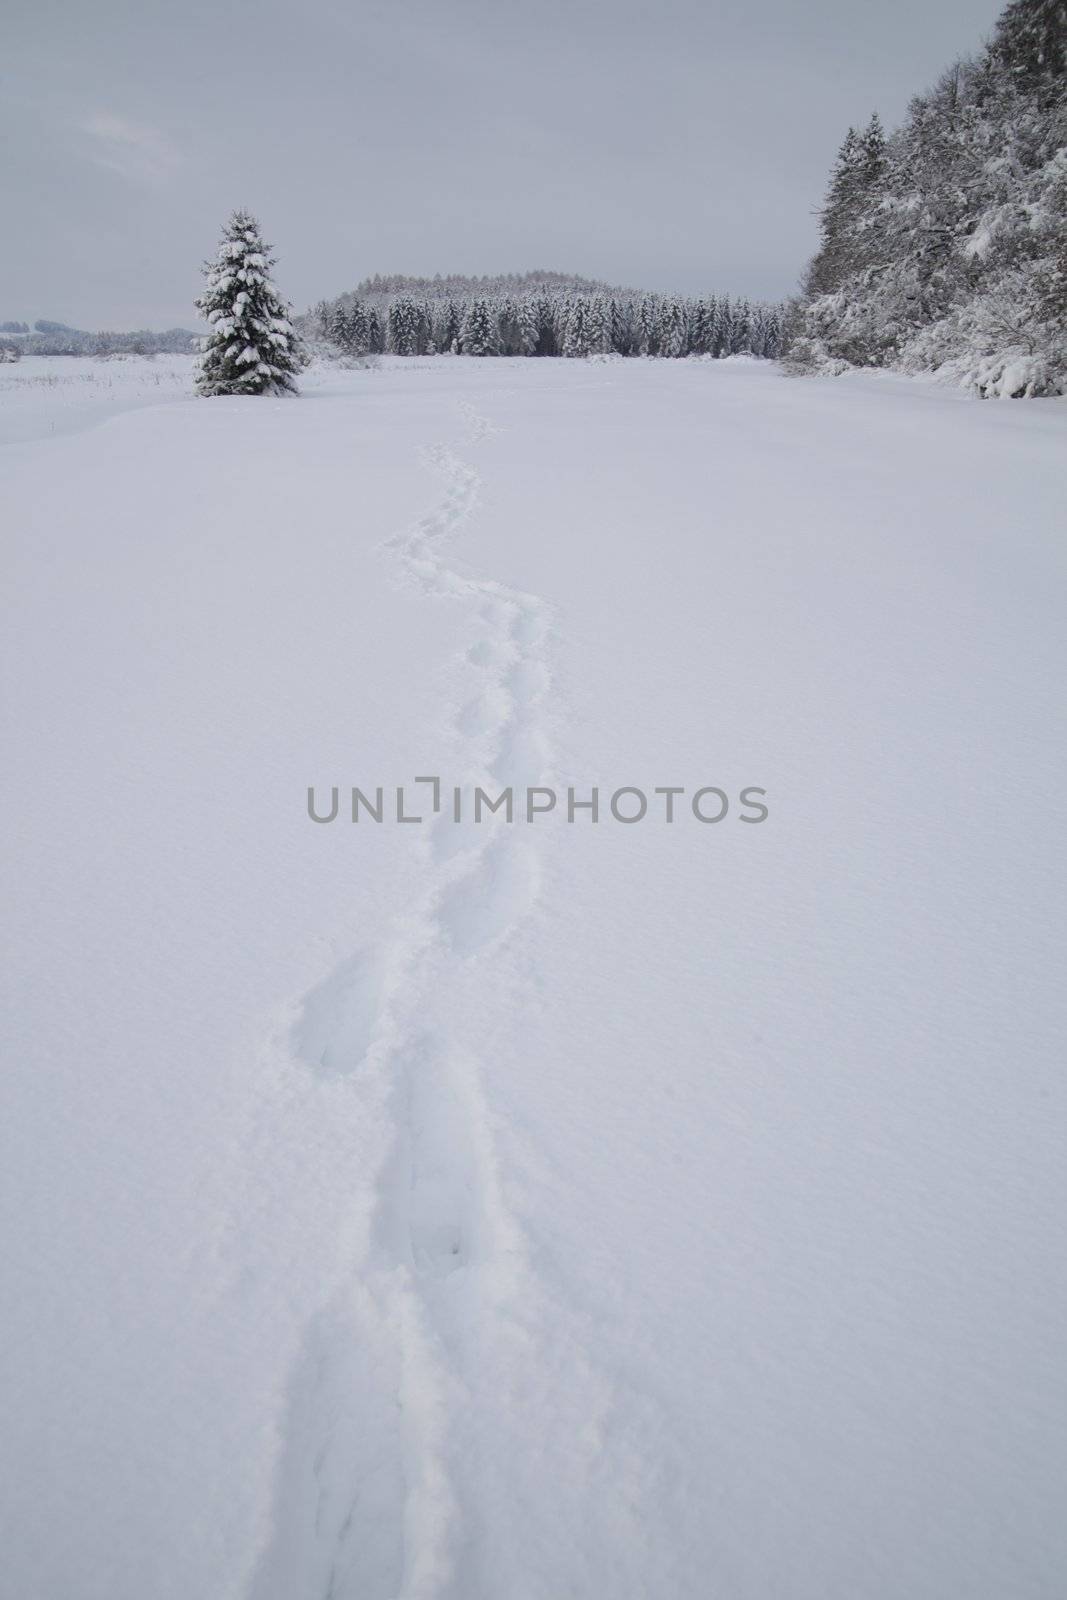 path with shoe prints in winter landscape